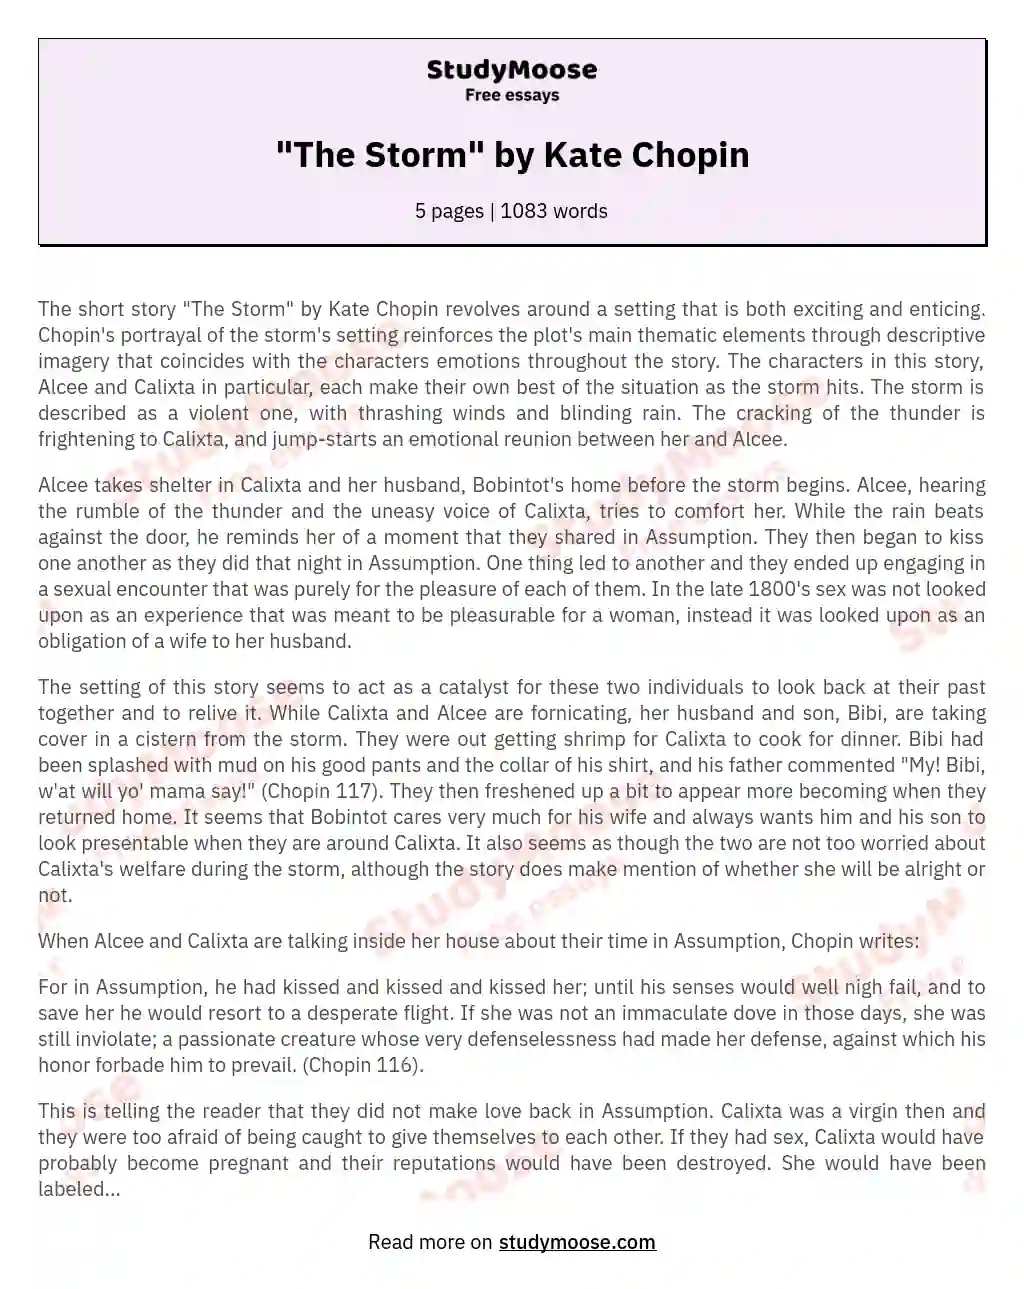 "The Storm" by Kate Chopin essay